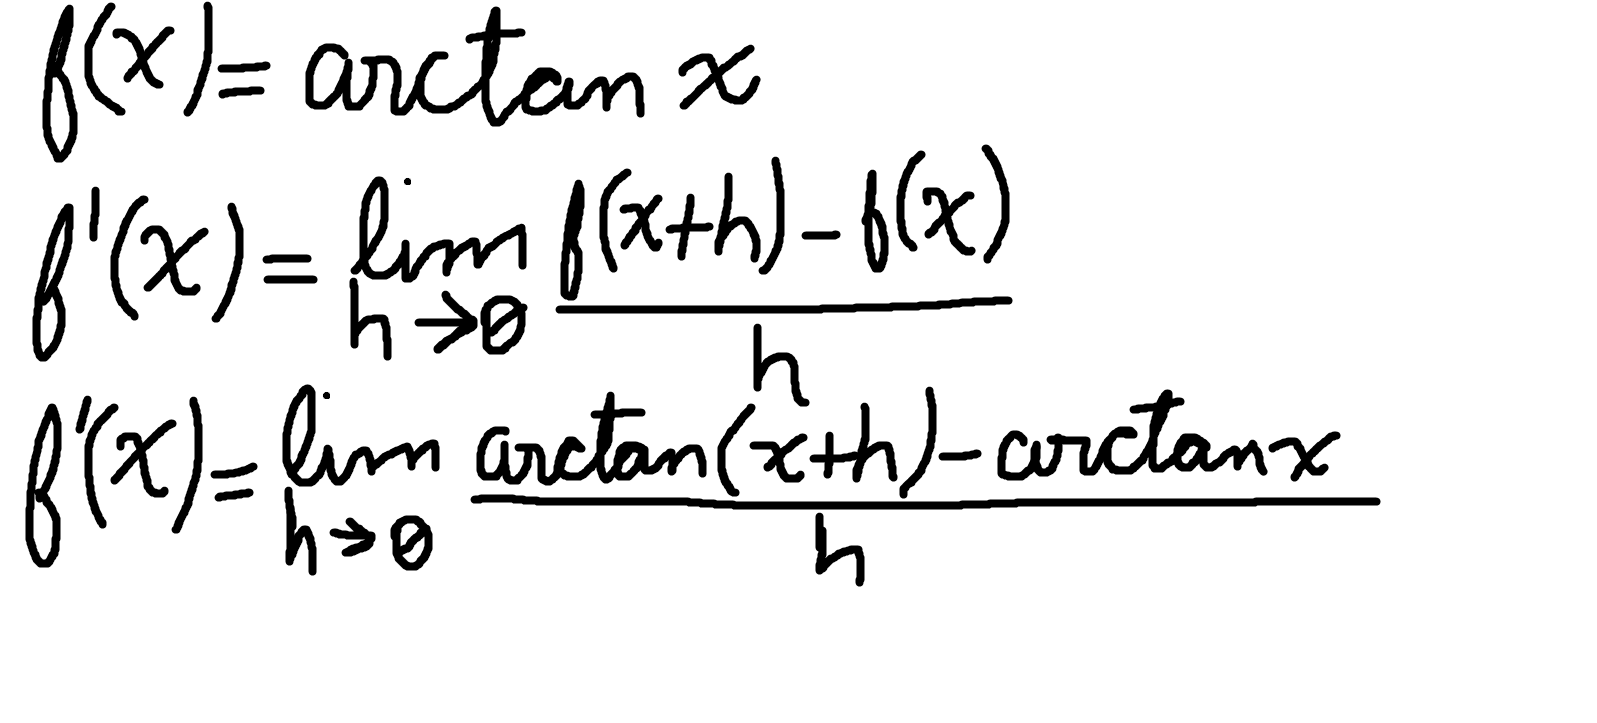 definition of the derivation of arctan(x), being: limit as h approaches zero of arctan of x plus h, minus arctan of x, divided by h